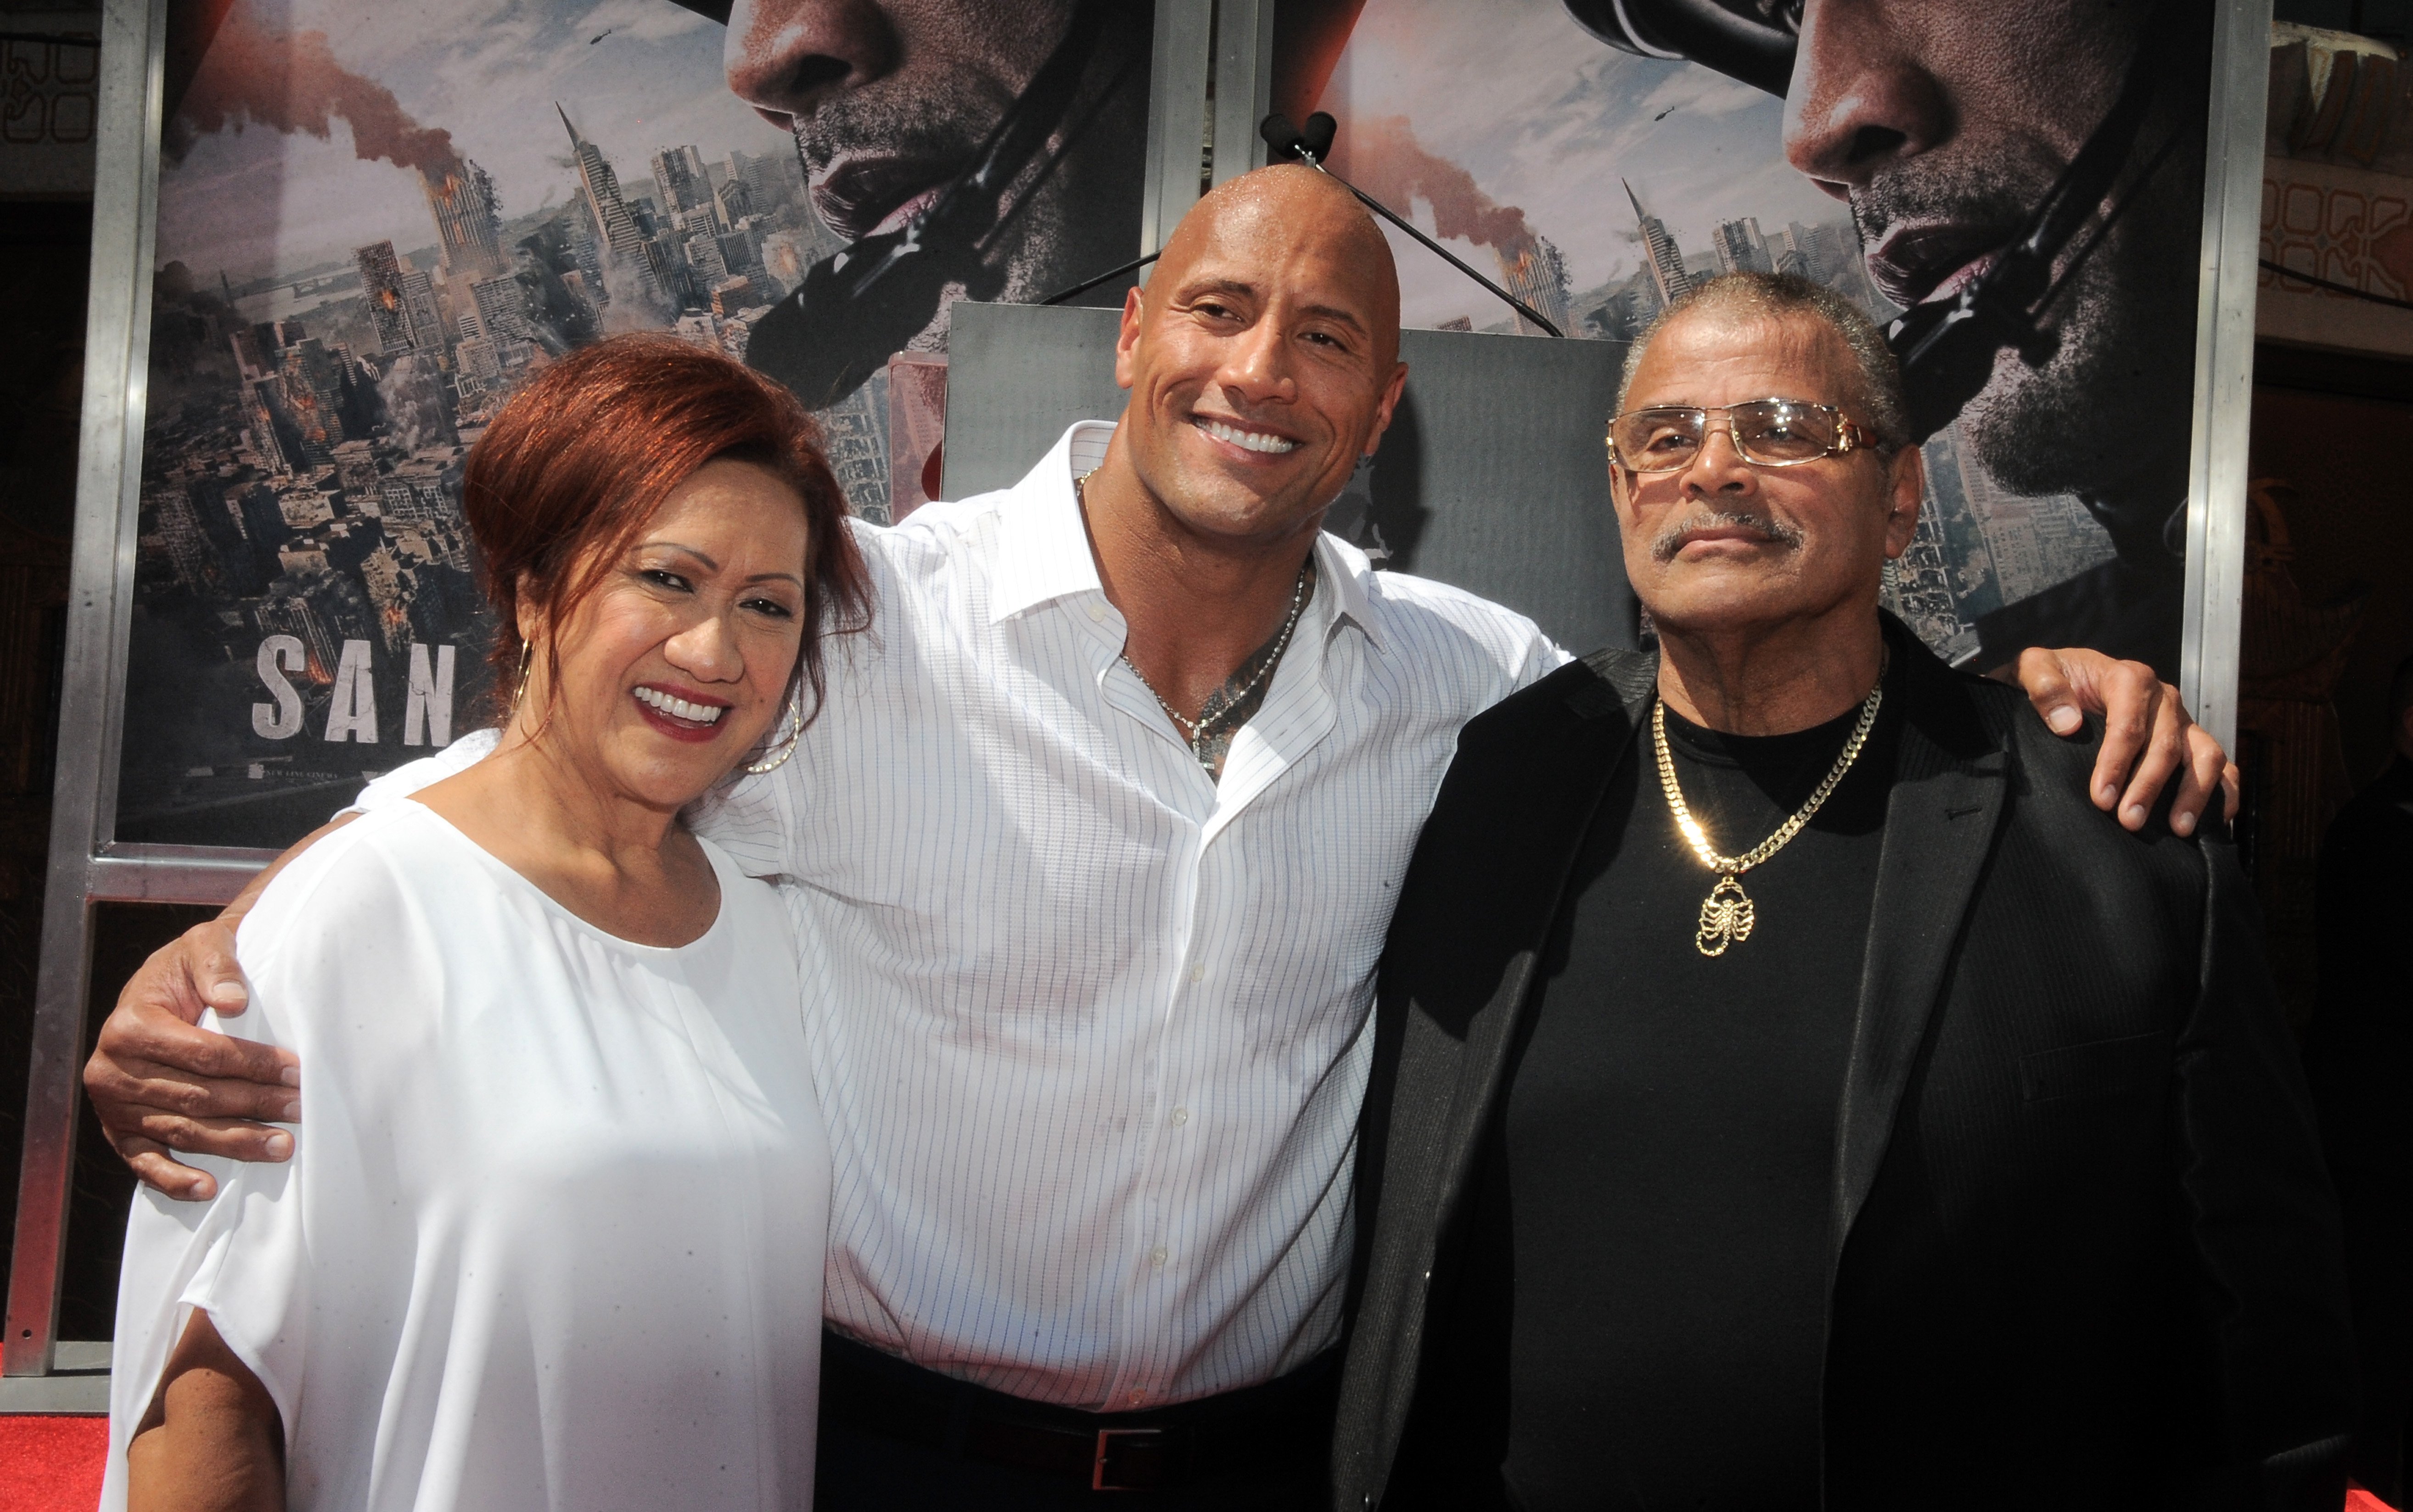 Dwayne "The Rock" Johnson with his parents at TCL Chinese Theatre IMAX on May 19, 2015, in Hollywood, California. | Source: Getty Images